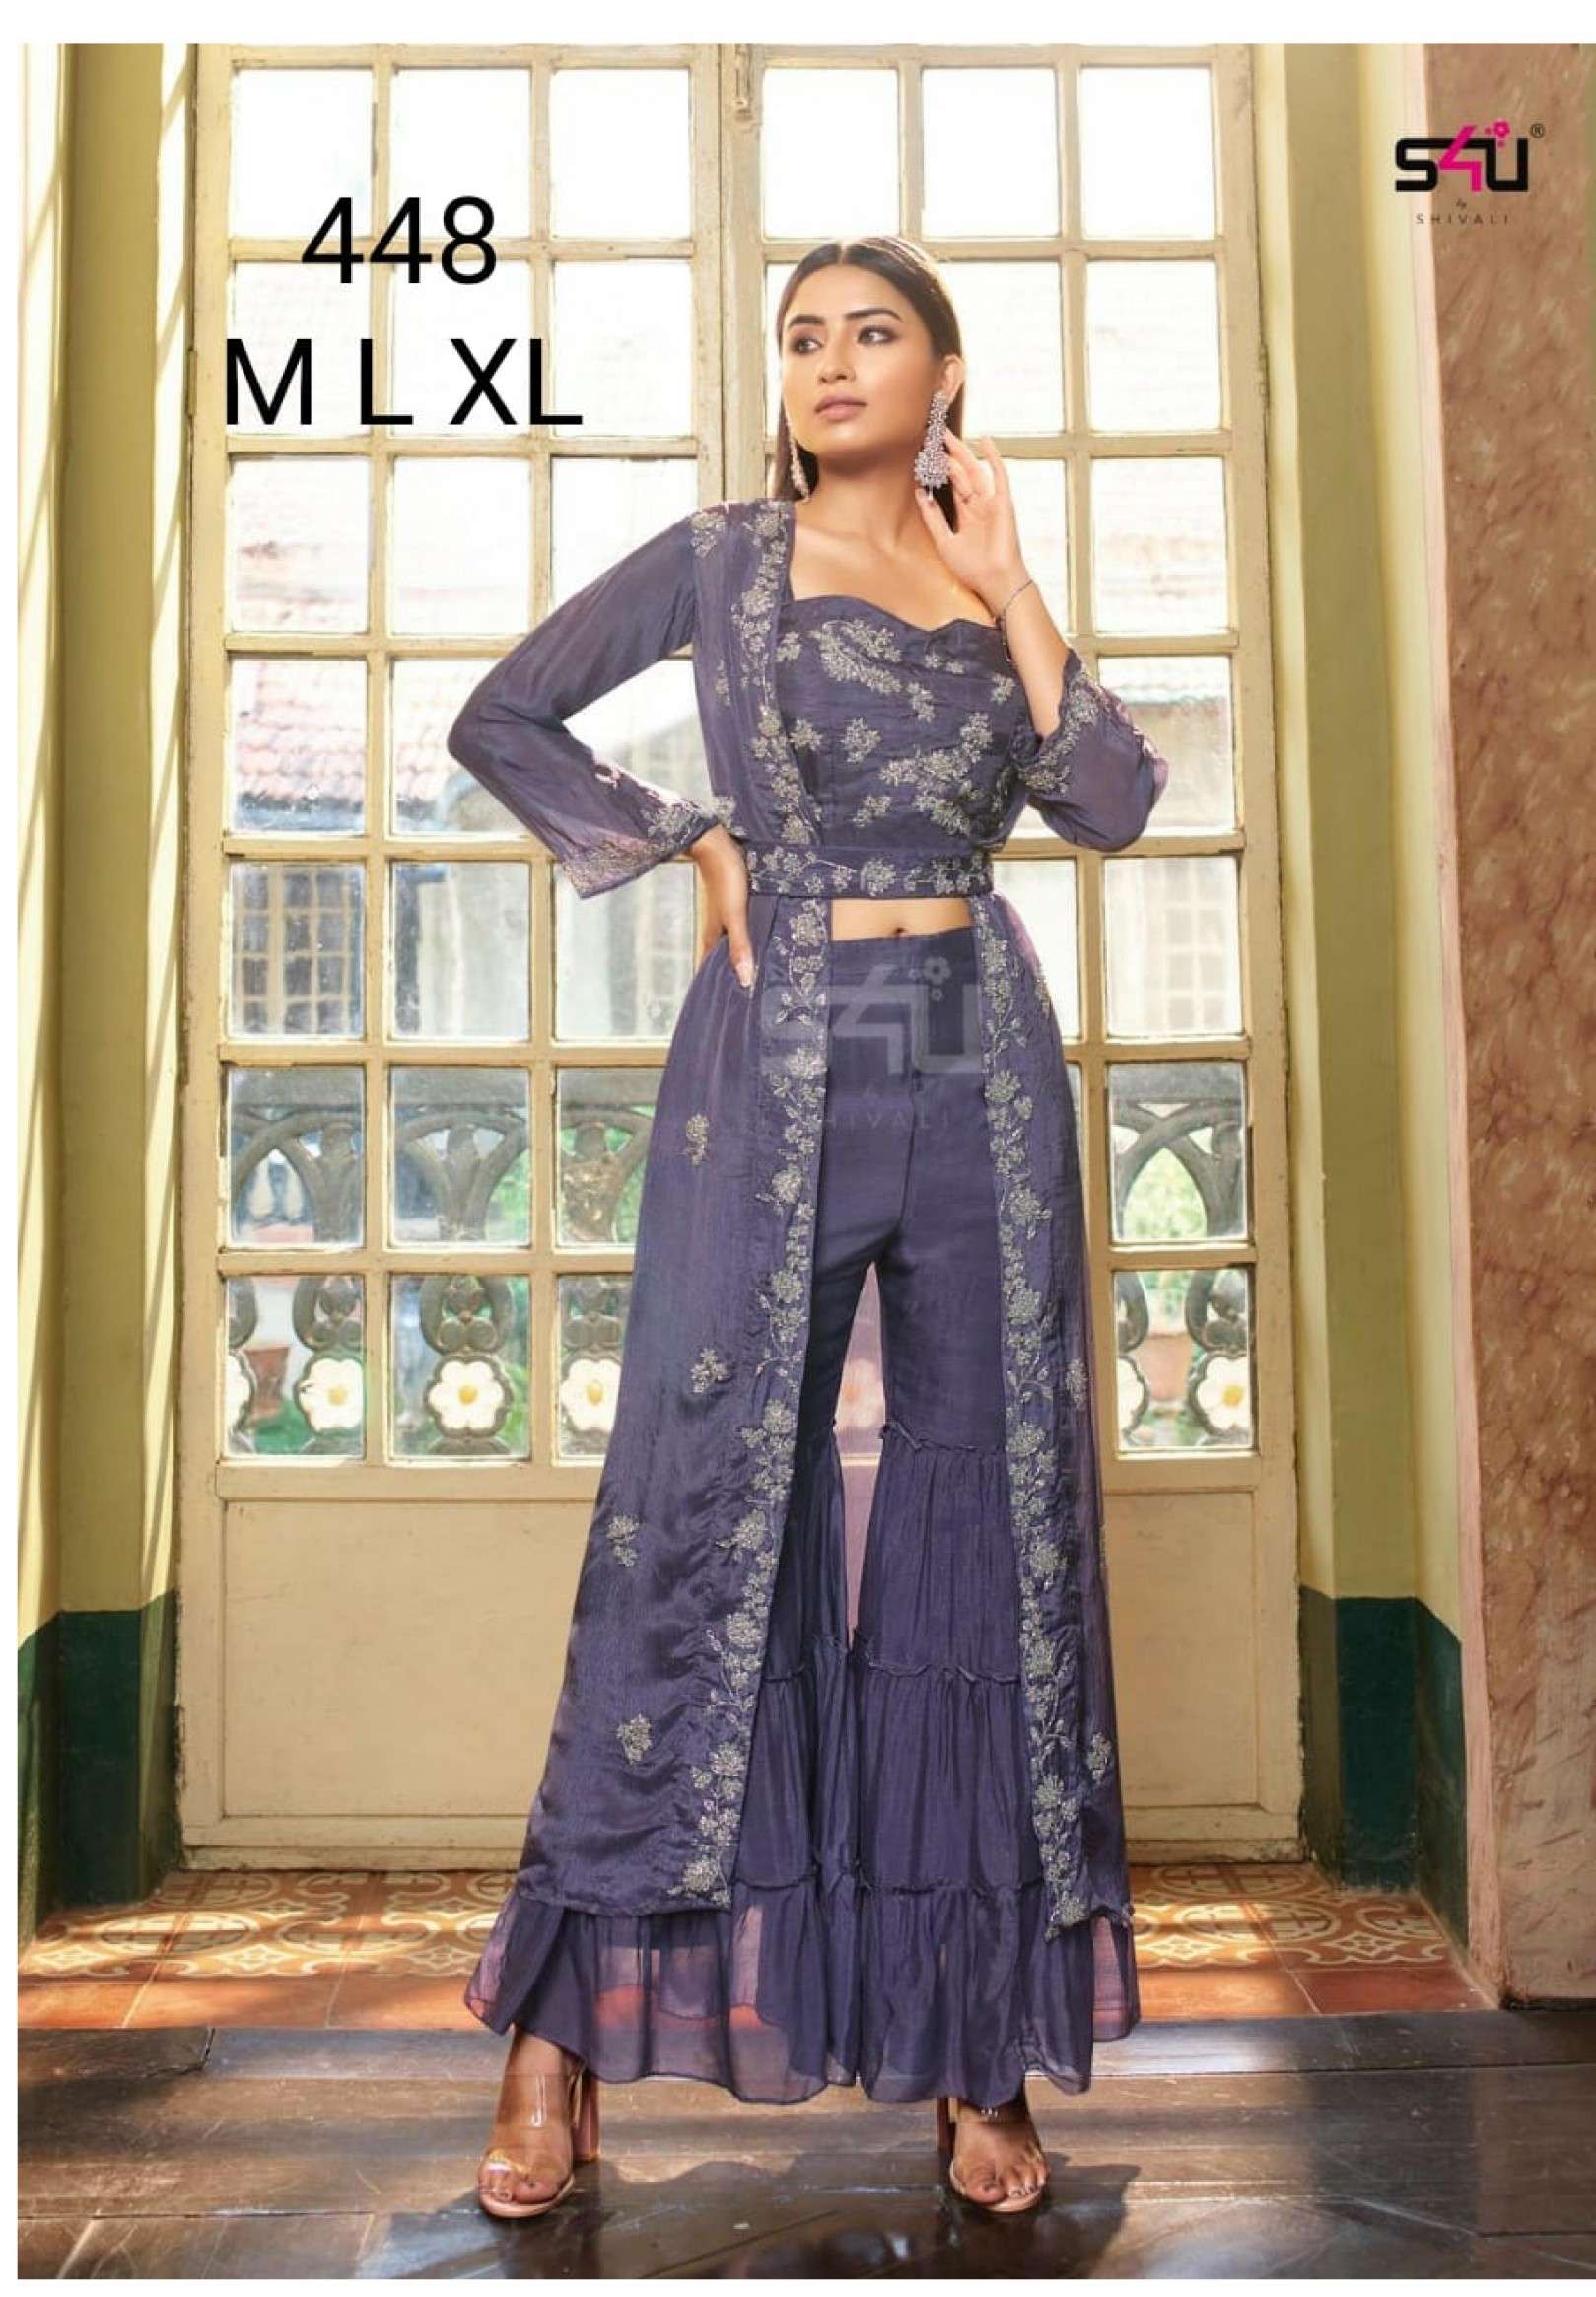 S4u 448 Fancy Readymade suits collection at best rate